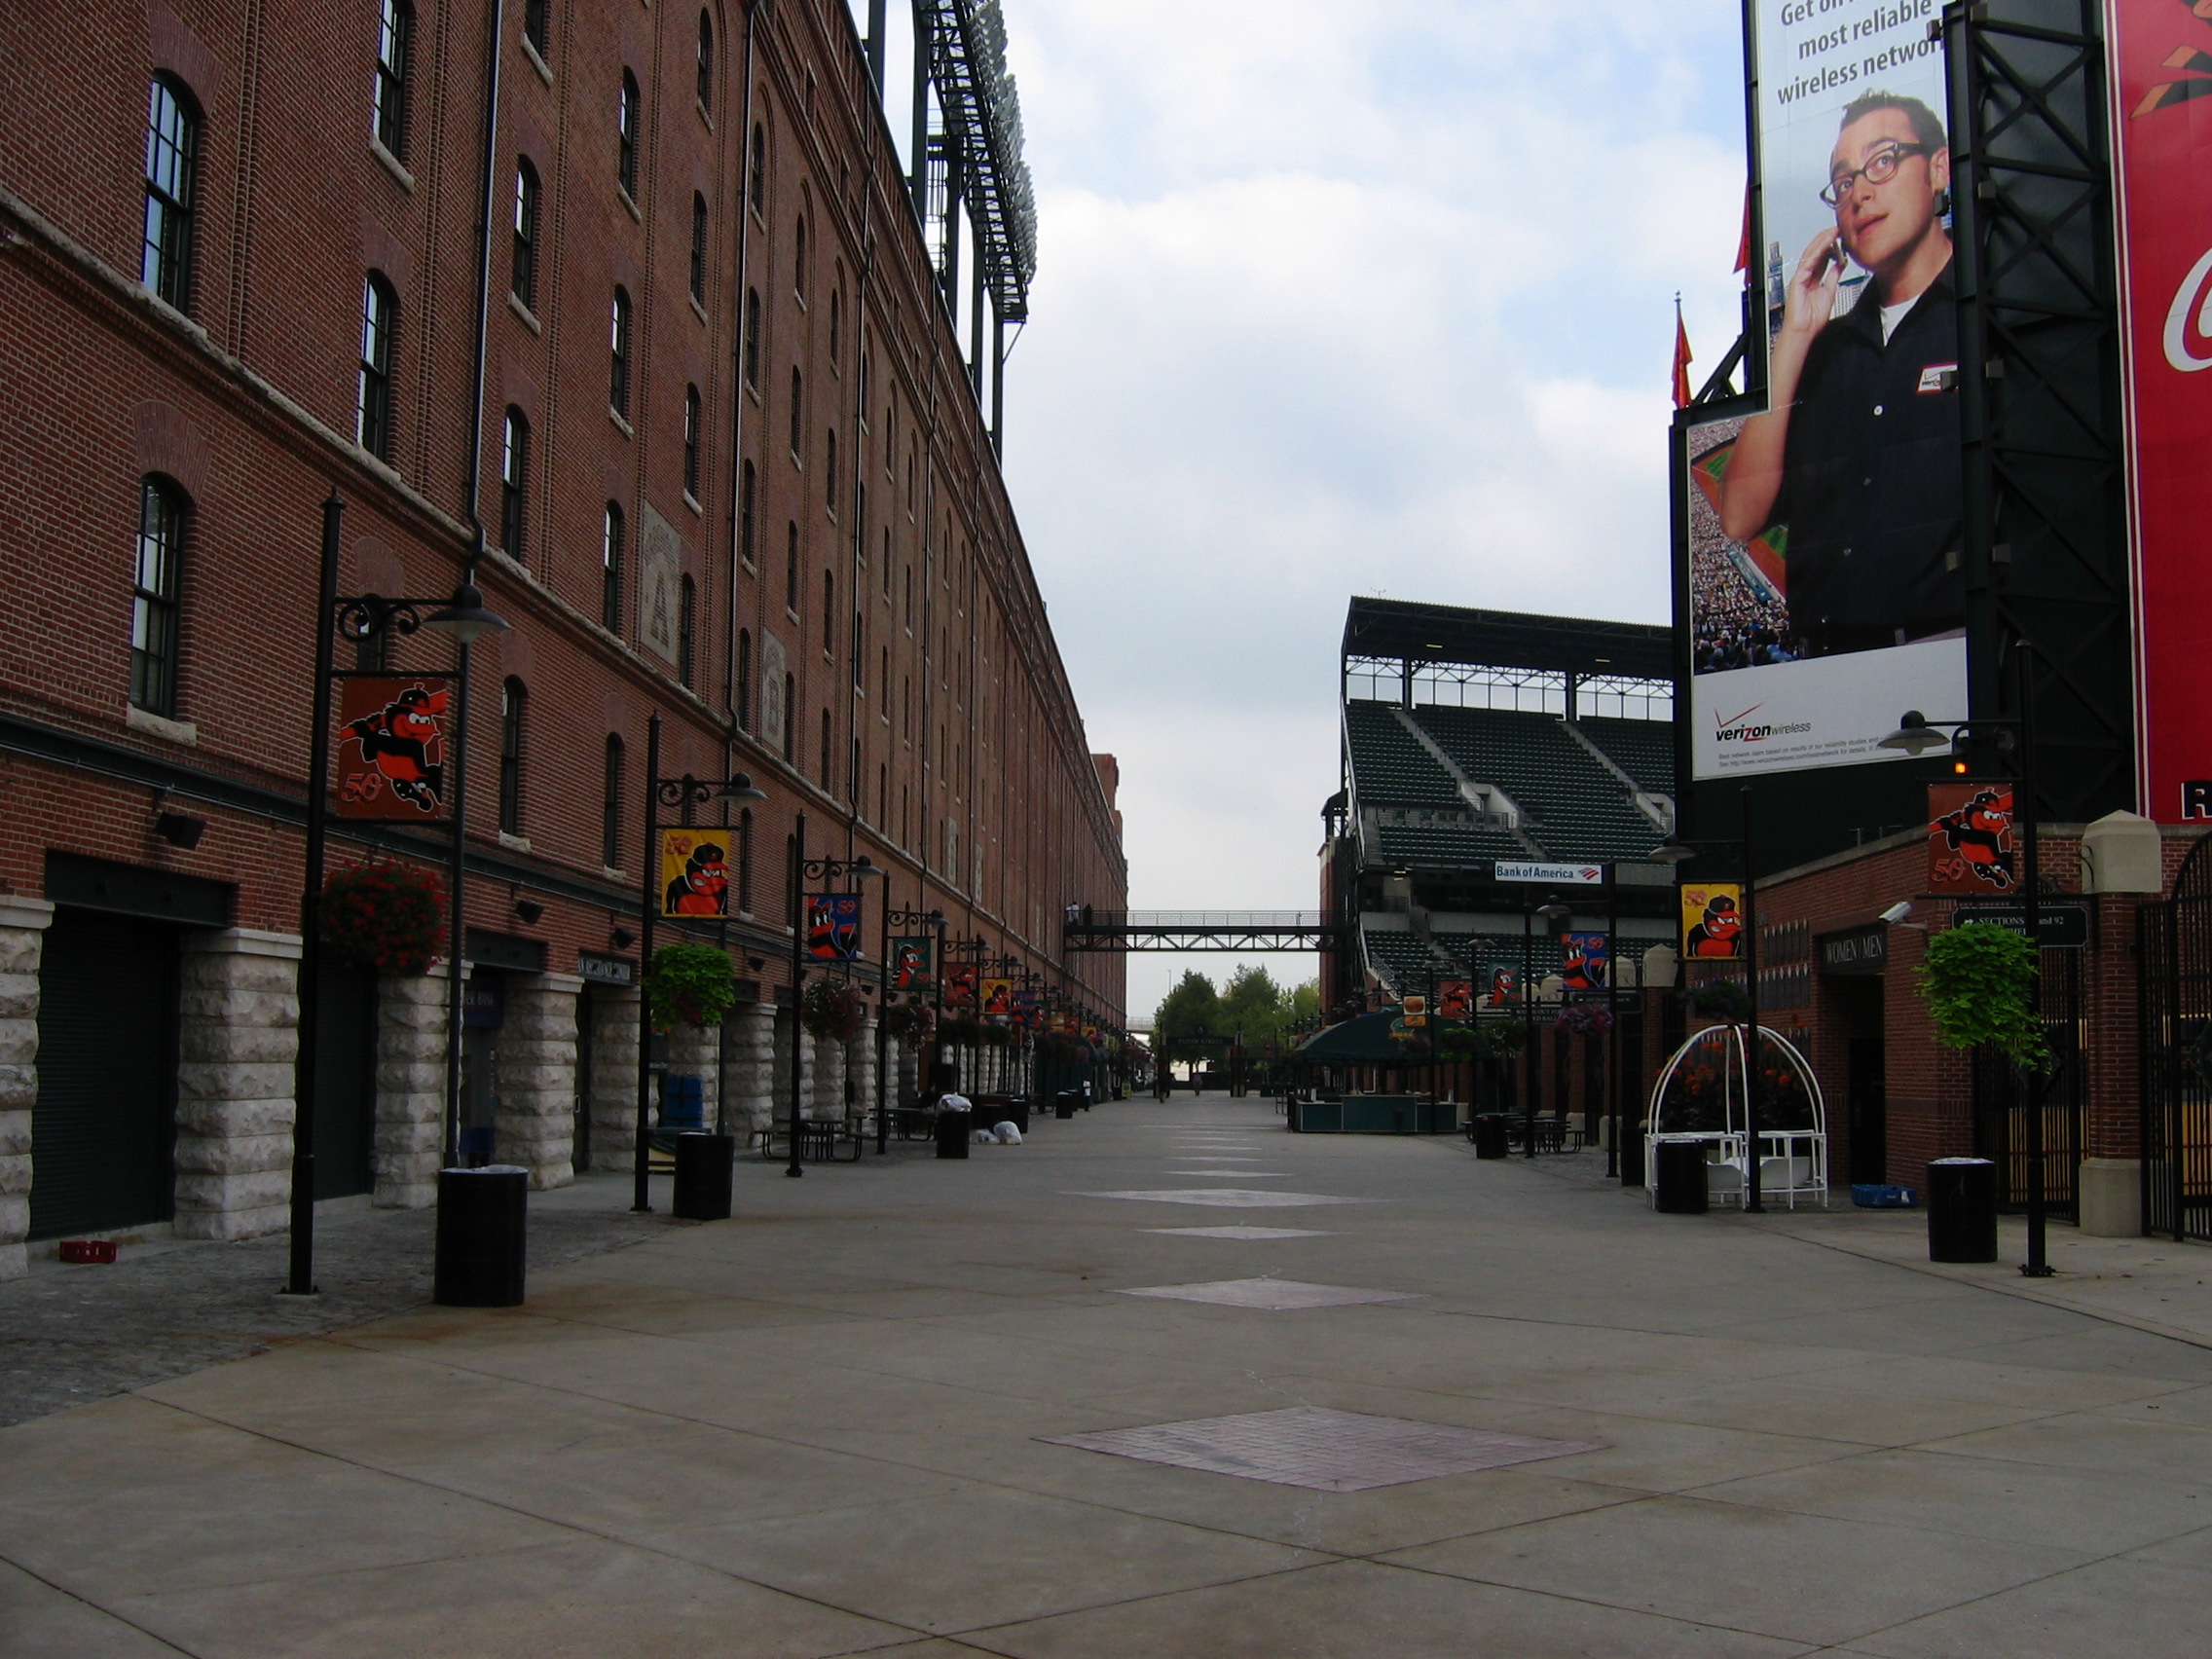 Engineer's Guide to Baltimore: Camden Yards and B&O Railroad Warehouse